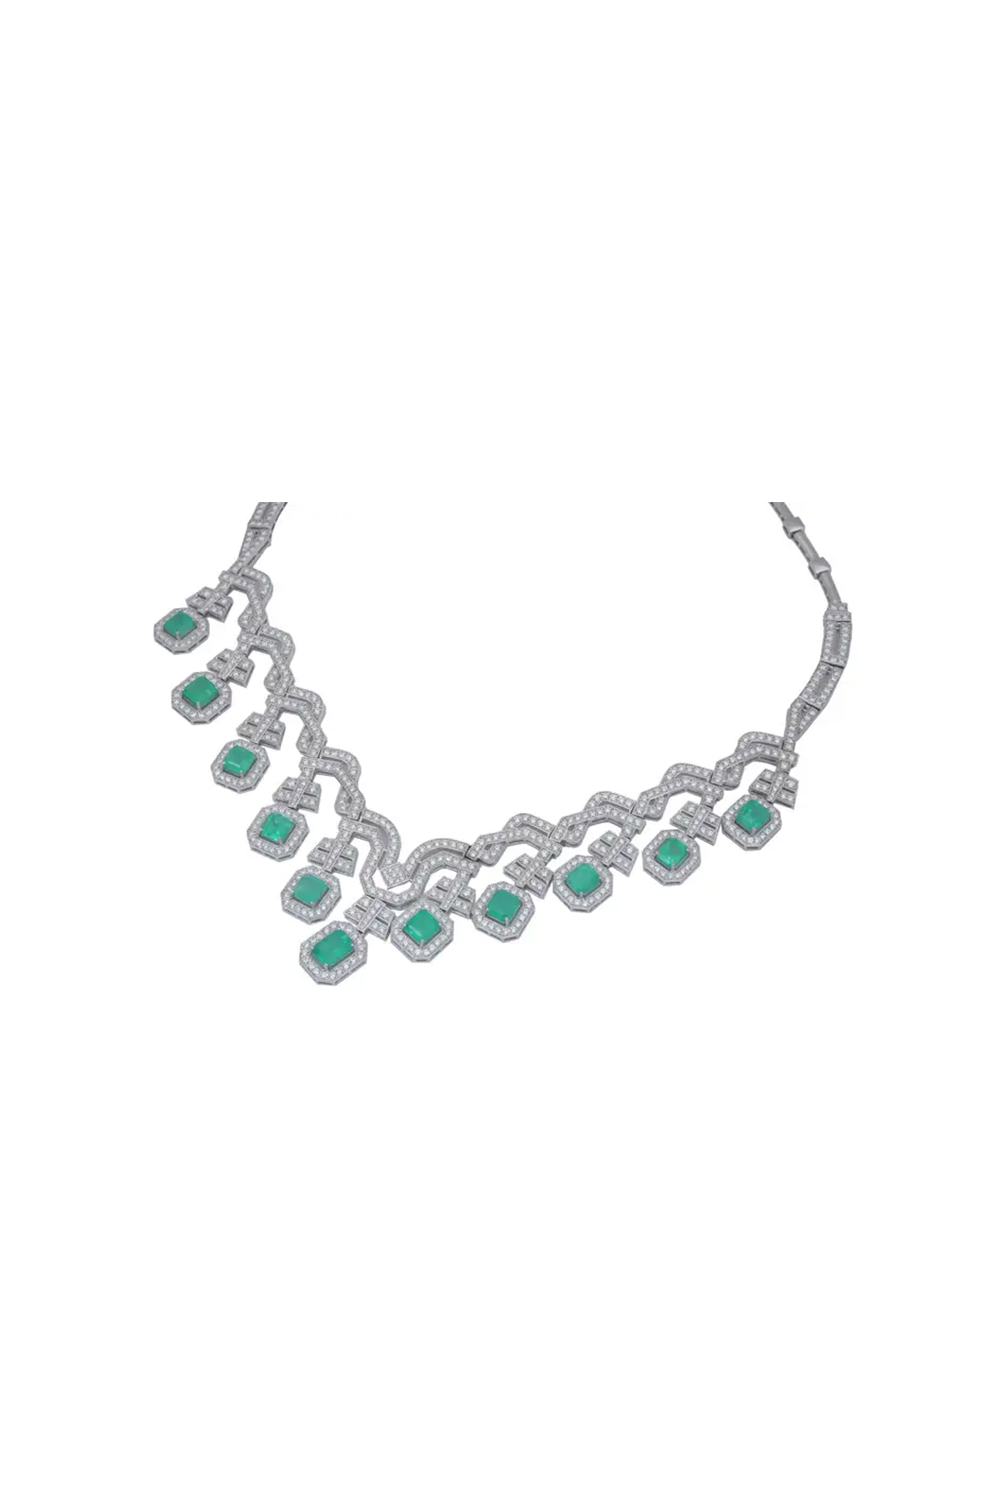 Natural Emerald Necklace with 13.81cts Diamond & 15.48cts Emerald